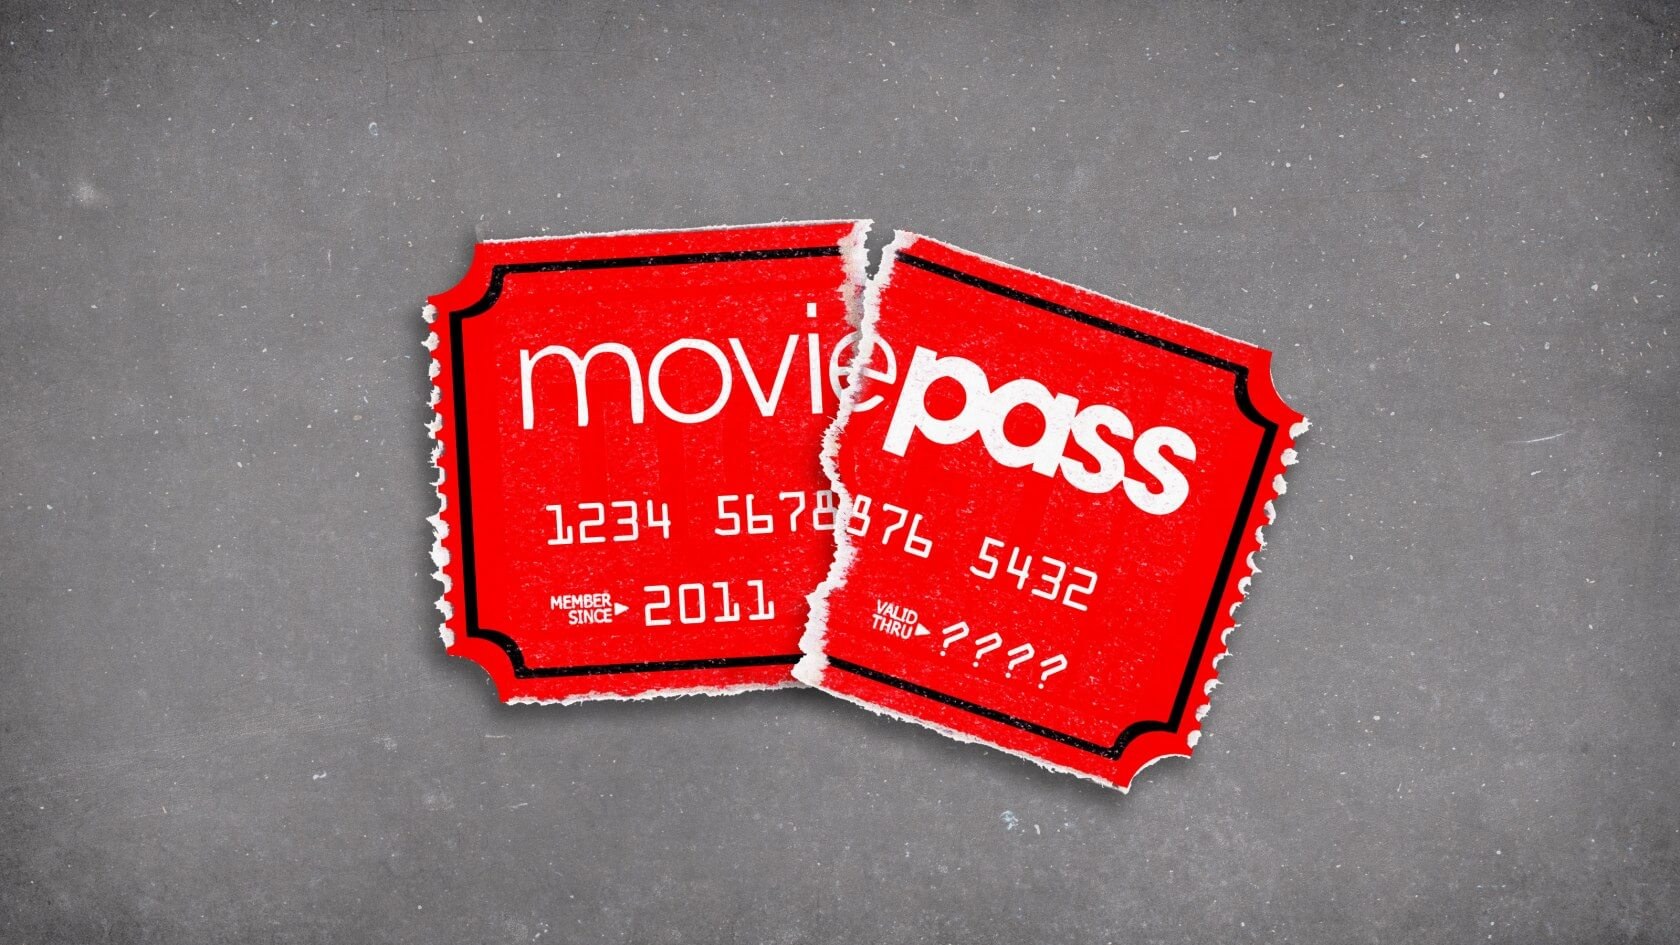 MoviePass 'interrupts service' with just 24 hours' notice